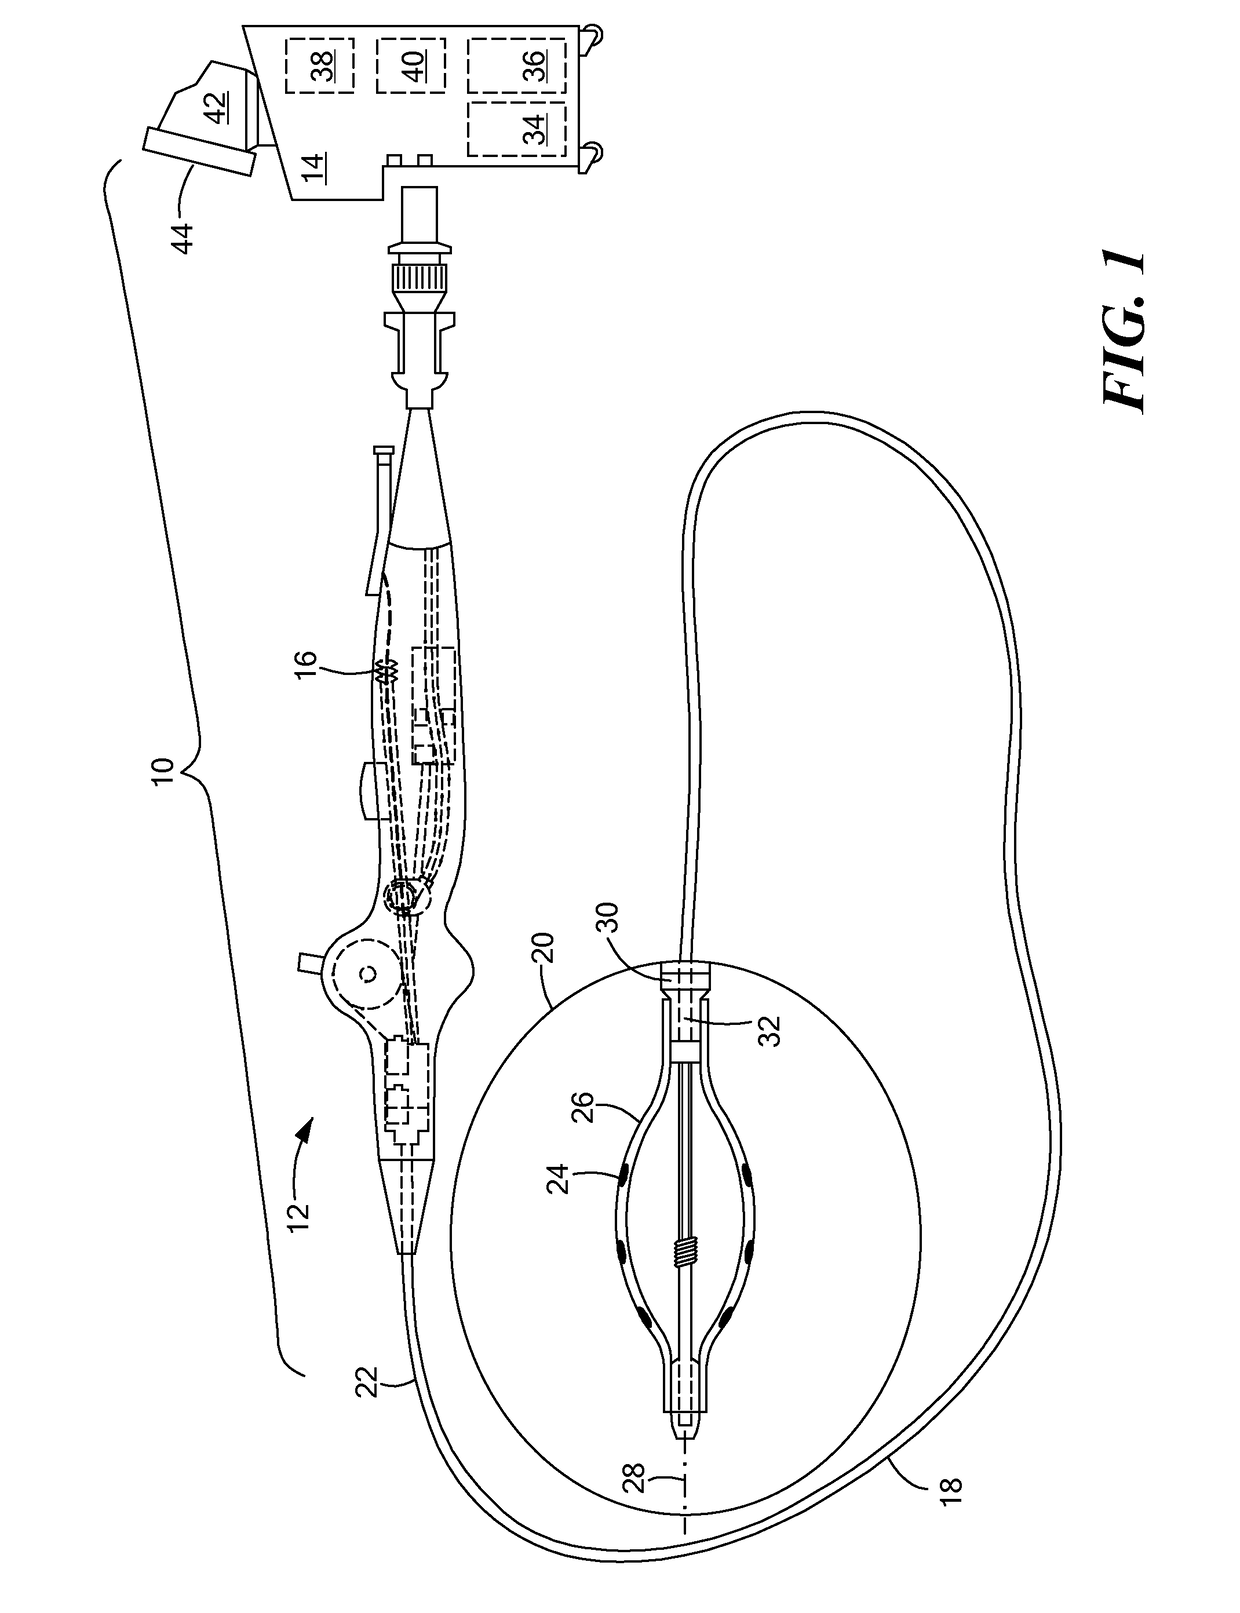 Catheters and methods for intracardiac electrical mapping